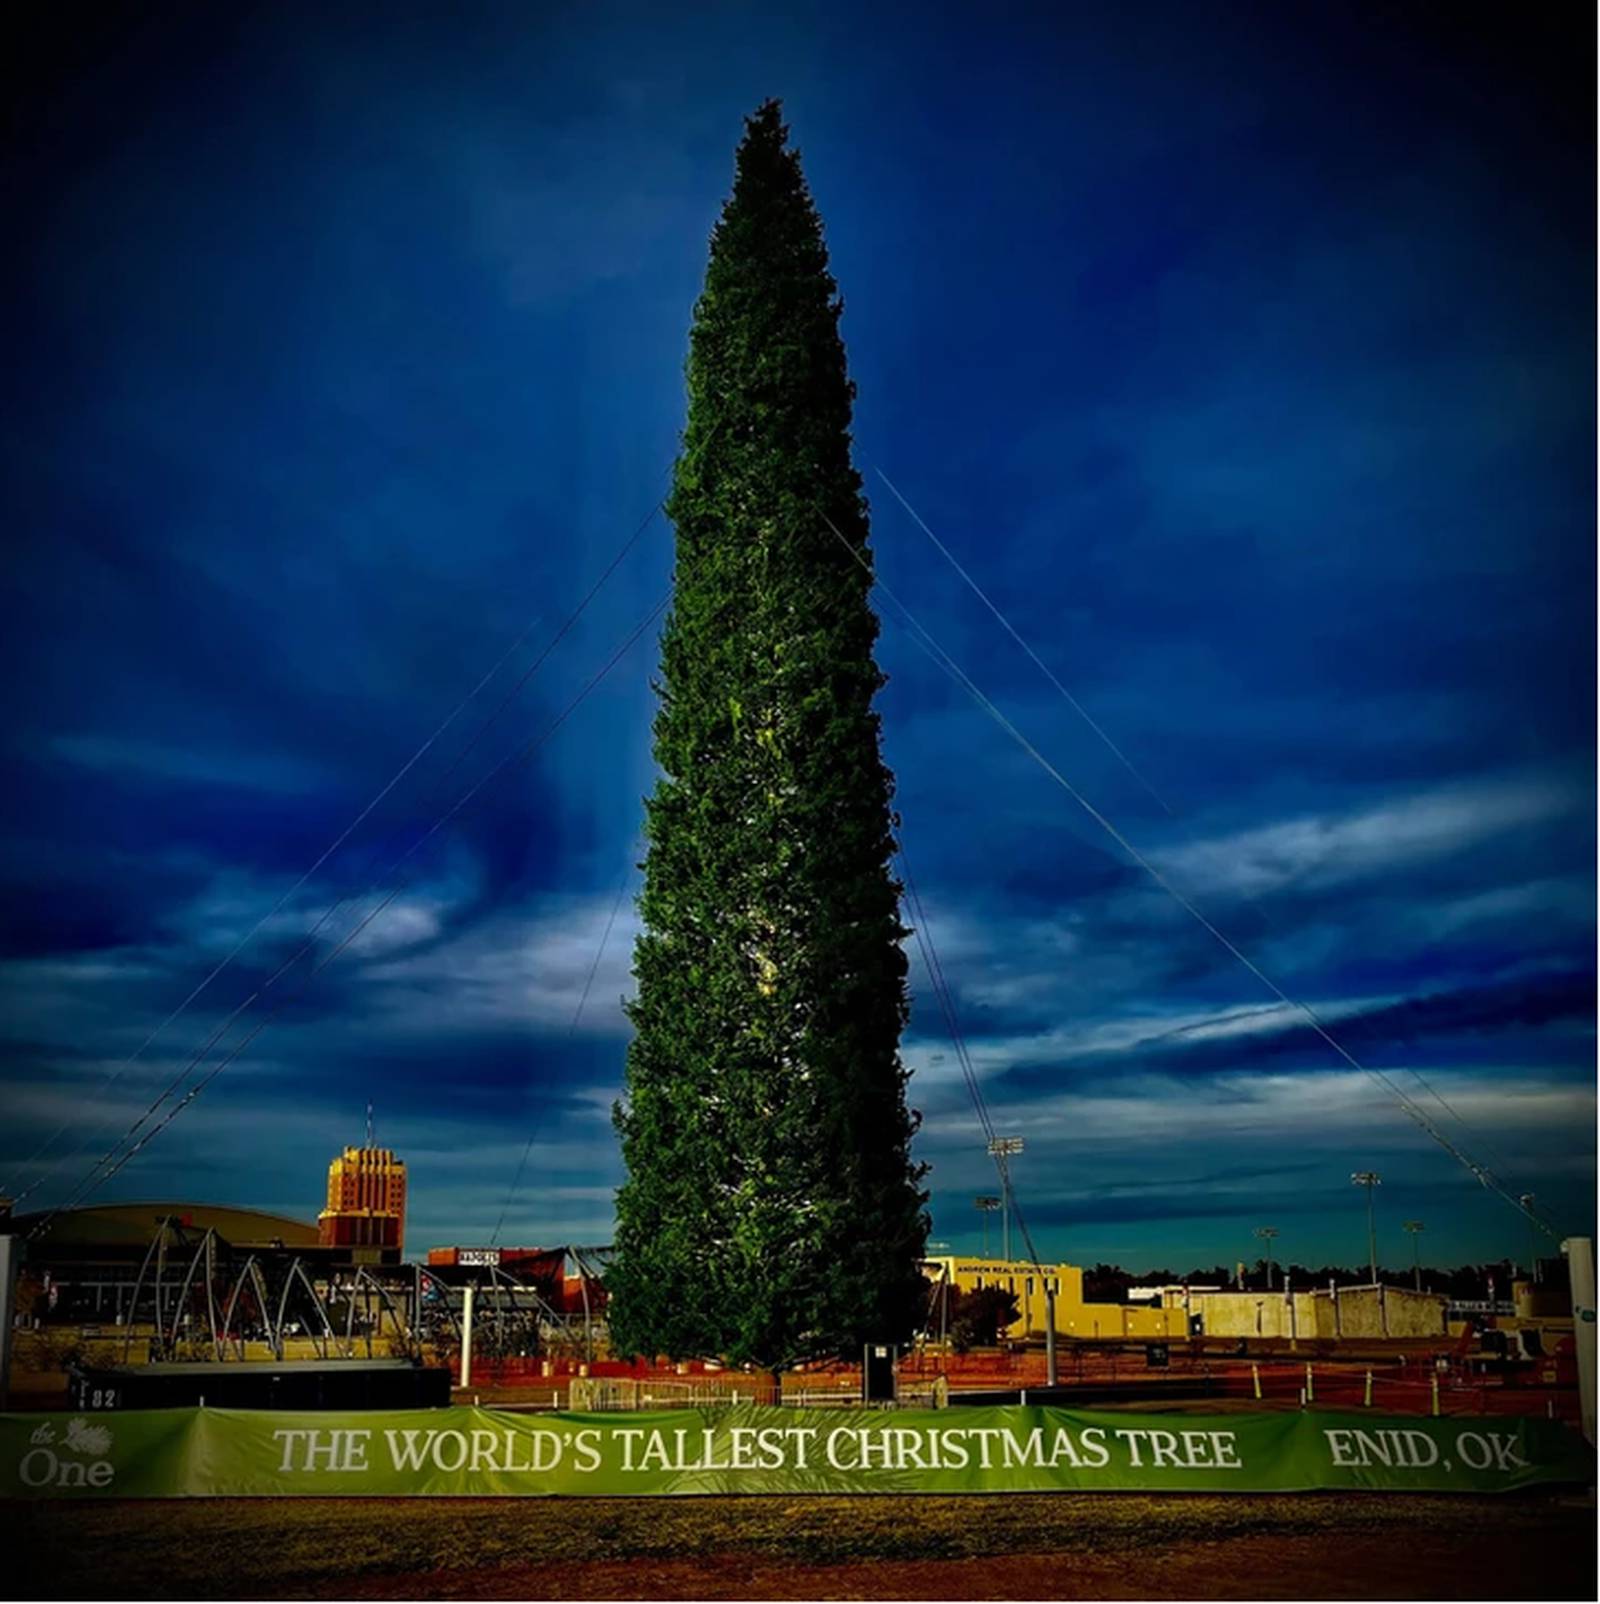 Is Enid’s Christmas tree still the tallest in the world? A tree in